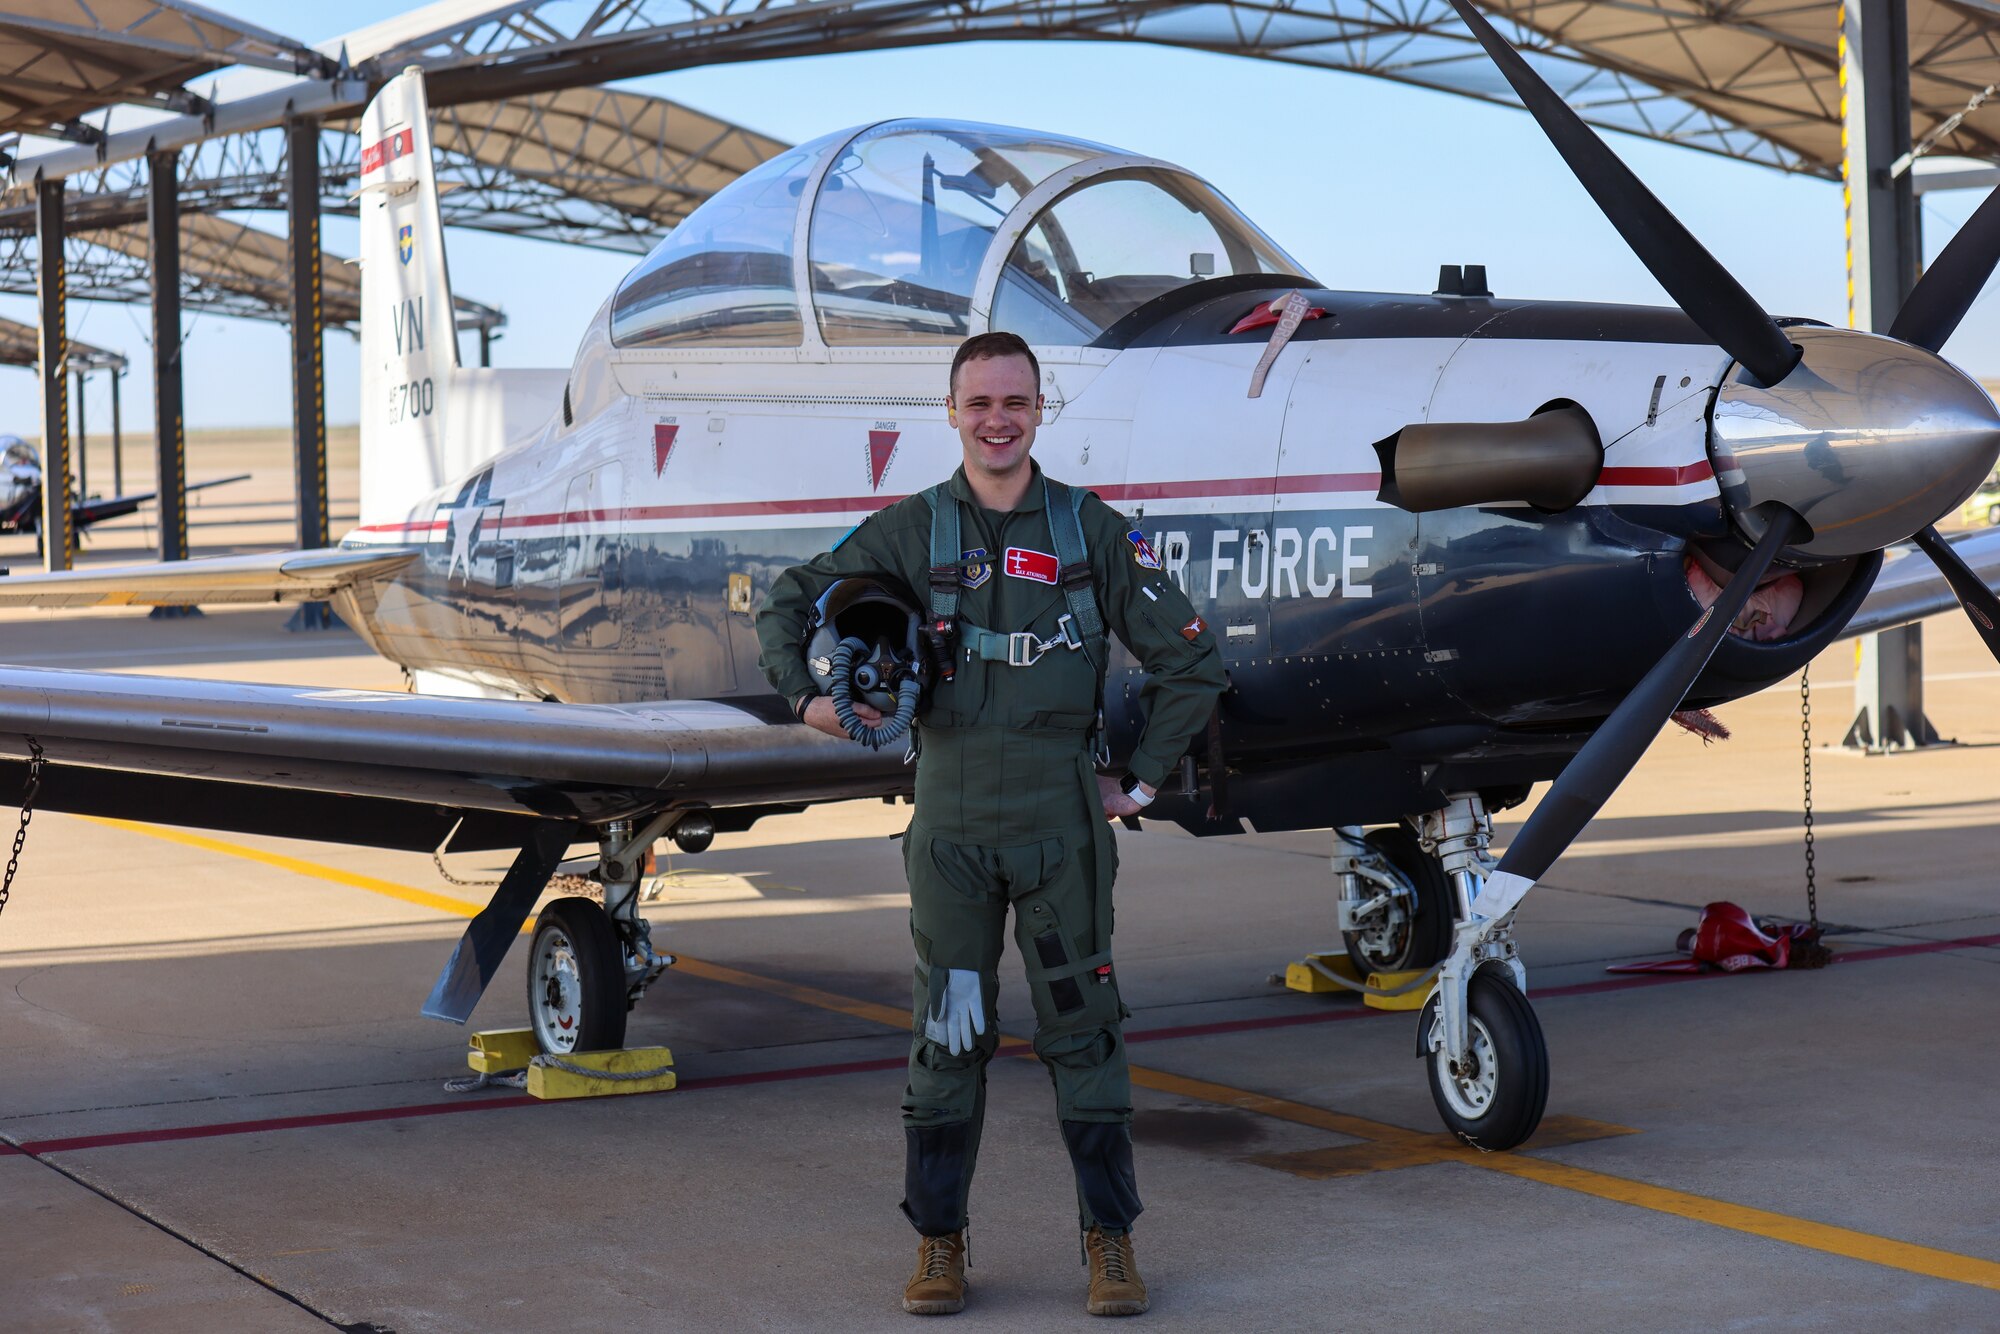 2nd Lt. Max Atkinson, 71st Student Squadron pilot in training, stands next to a T-6 Texan II at Vance Air Force Base, Oklahoma, March 31, 2021. Atkinson saved the life of a motorcyclist following a nearly fatal accident in mid-March. (U.S. Air Force/Courtesy photo)